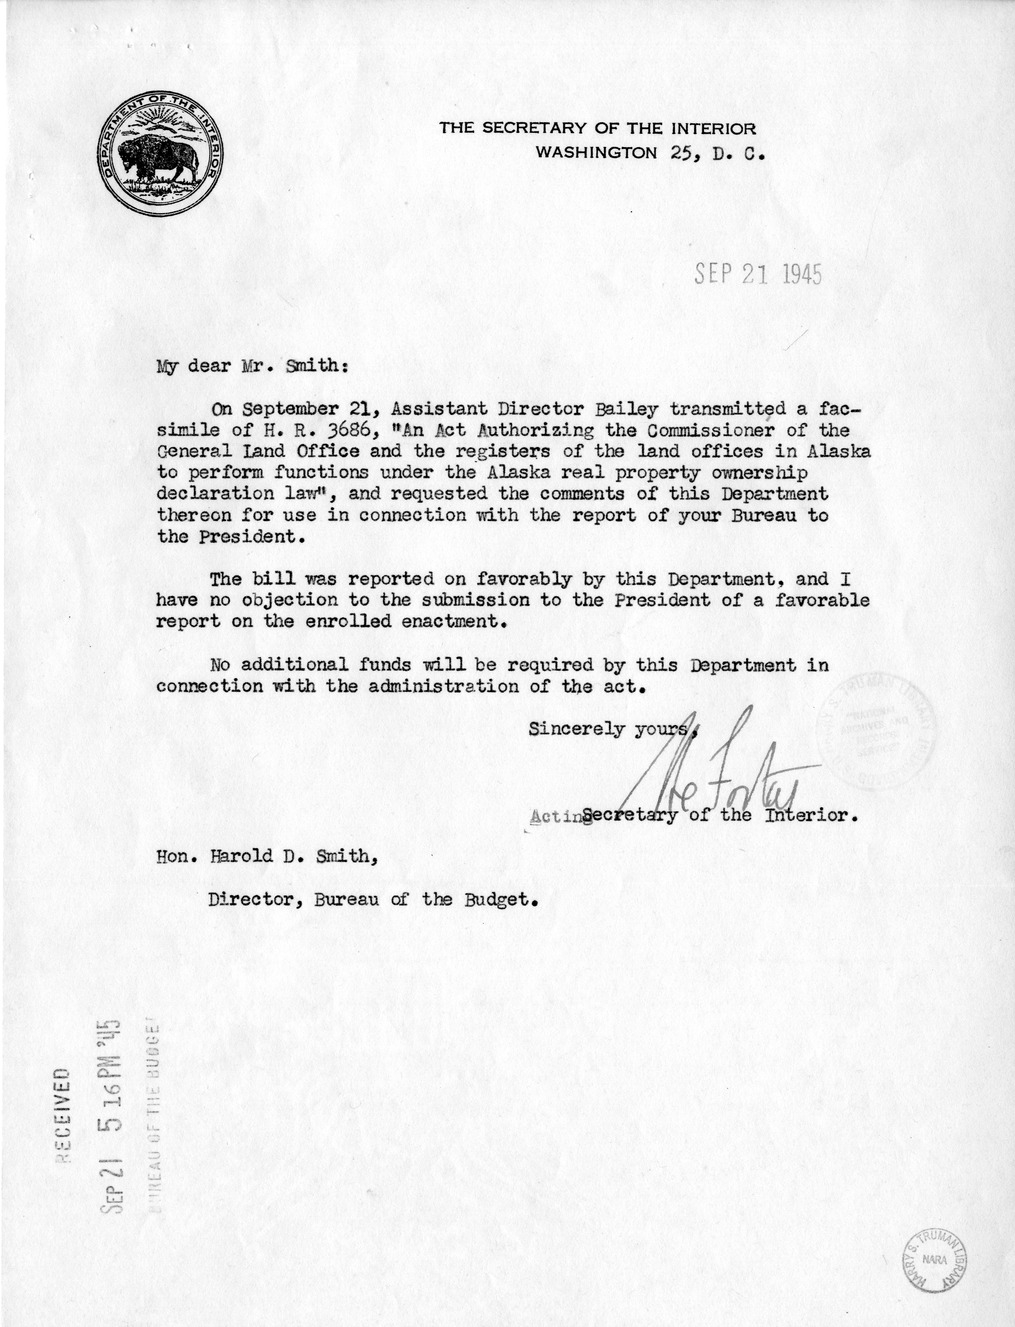 Memorandum from Frederick J. Bailey to M. C. Latta, H.R. 3686, To Authorize the Commissioner of the General Land Office and the Registers of the Land Offices in Alaska to Perform Functions Under the Alaska Real Property Ownership Declaration Law, with Att